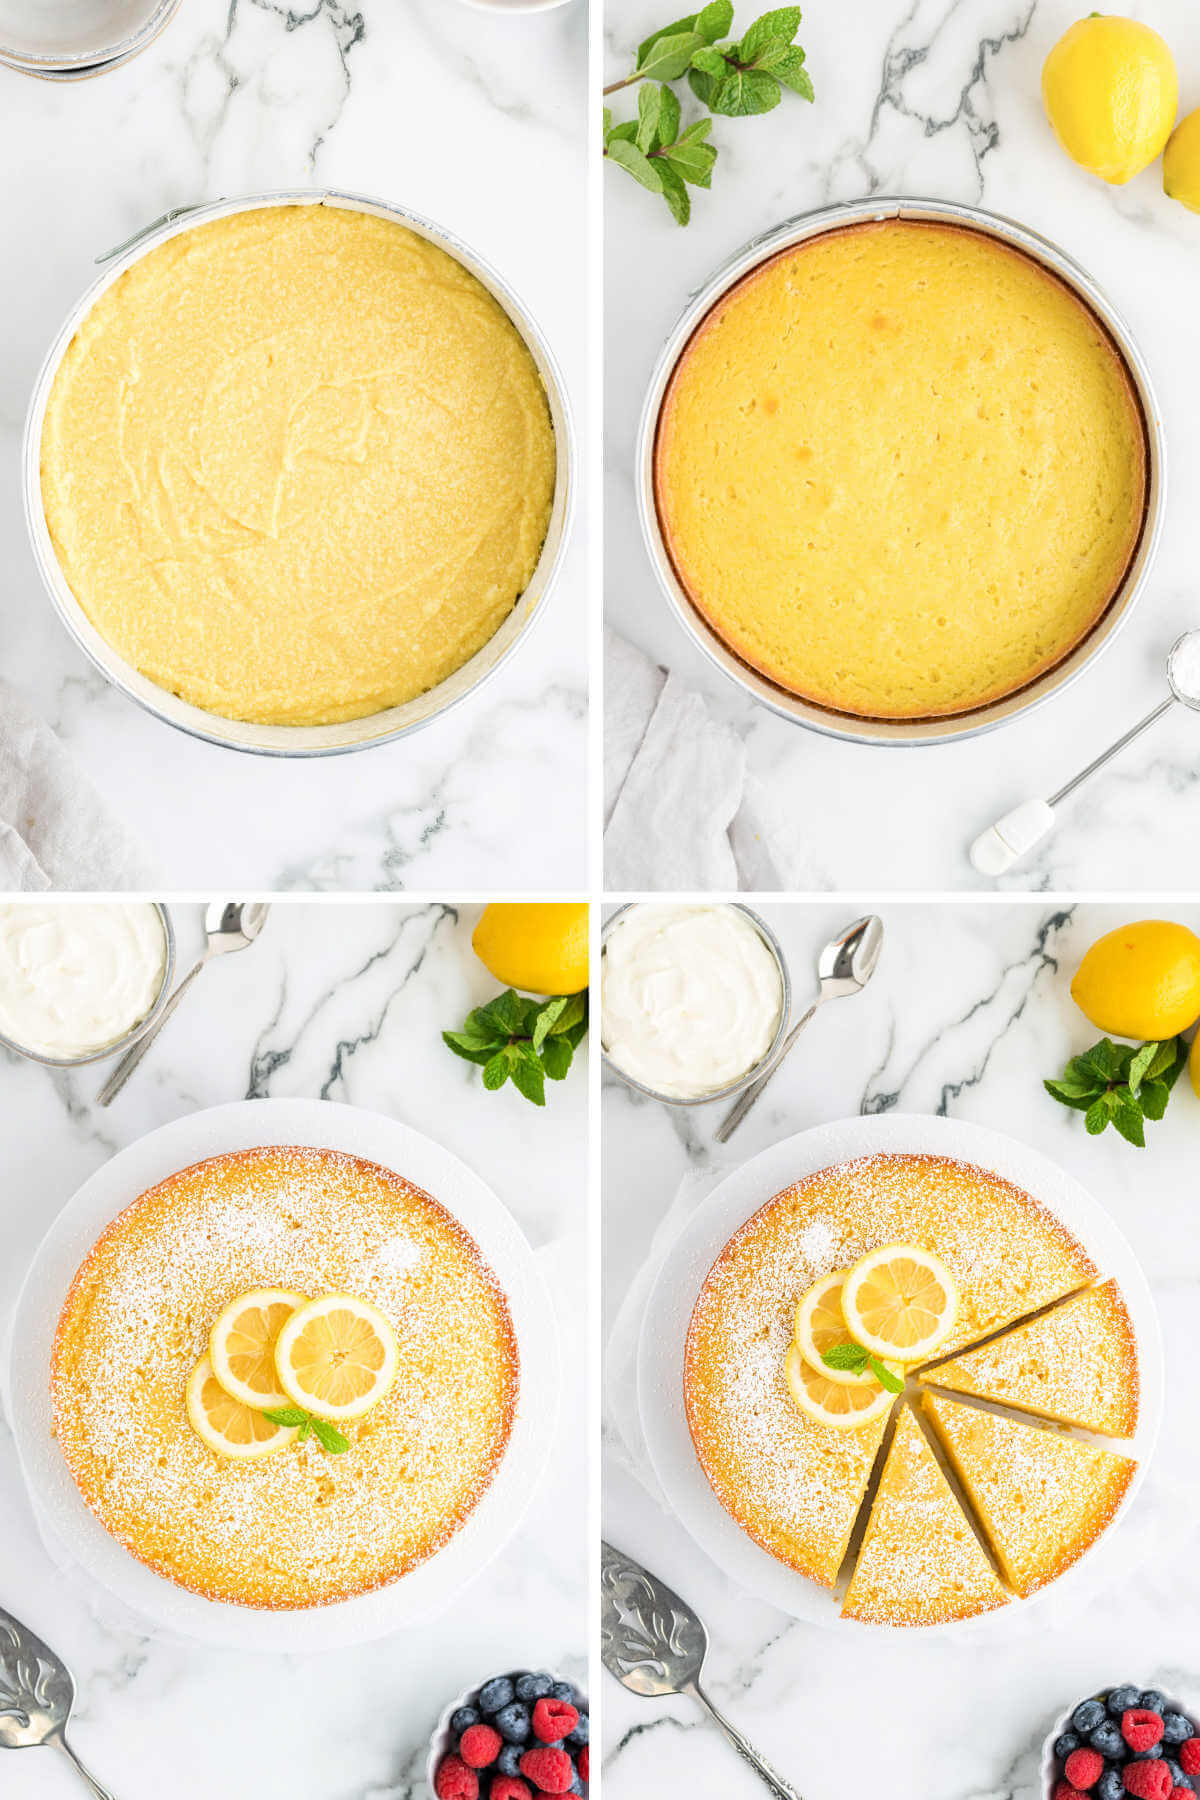 a freshly baked lemon ricotta cake dusted with powdered sugar and garnished with lemon slices.